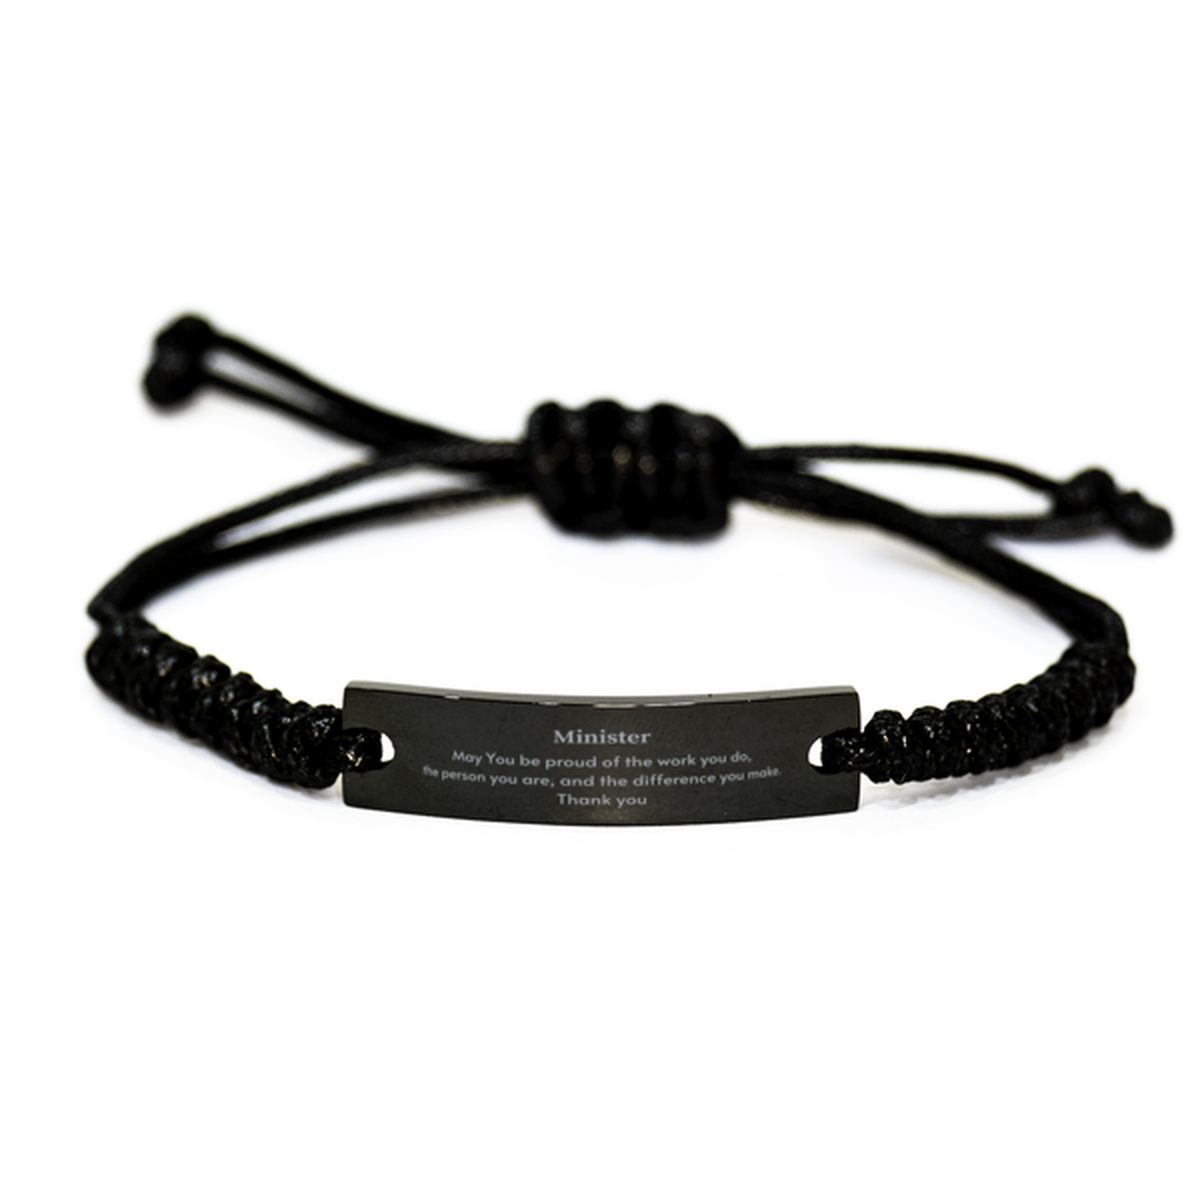 Heartwarming Black Rope Bracelet Retirement Coworkers Gifts for Minister, Minister May You be proud of the work you do, the person you are Gifts for Boss Men Women Friends